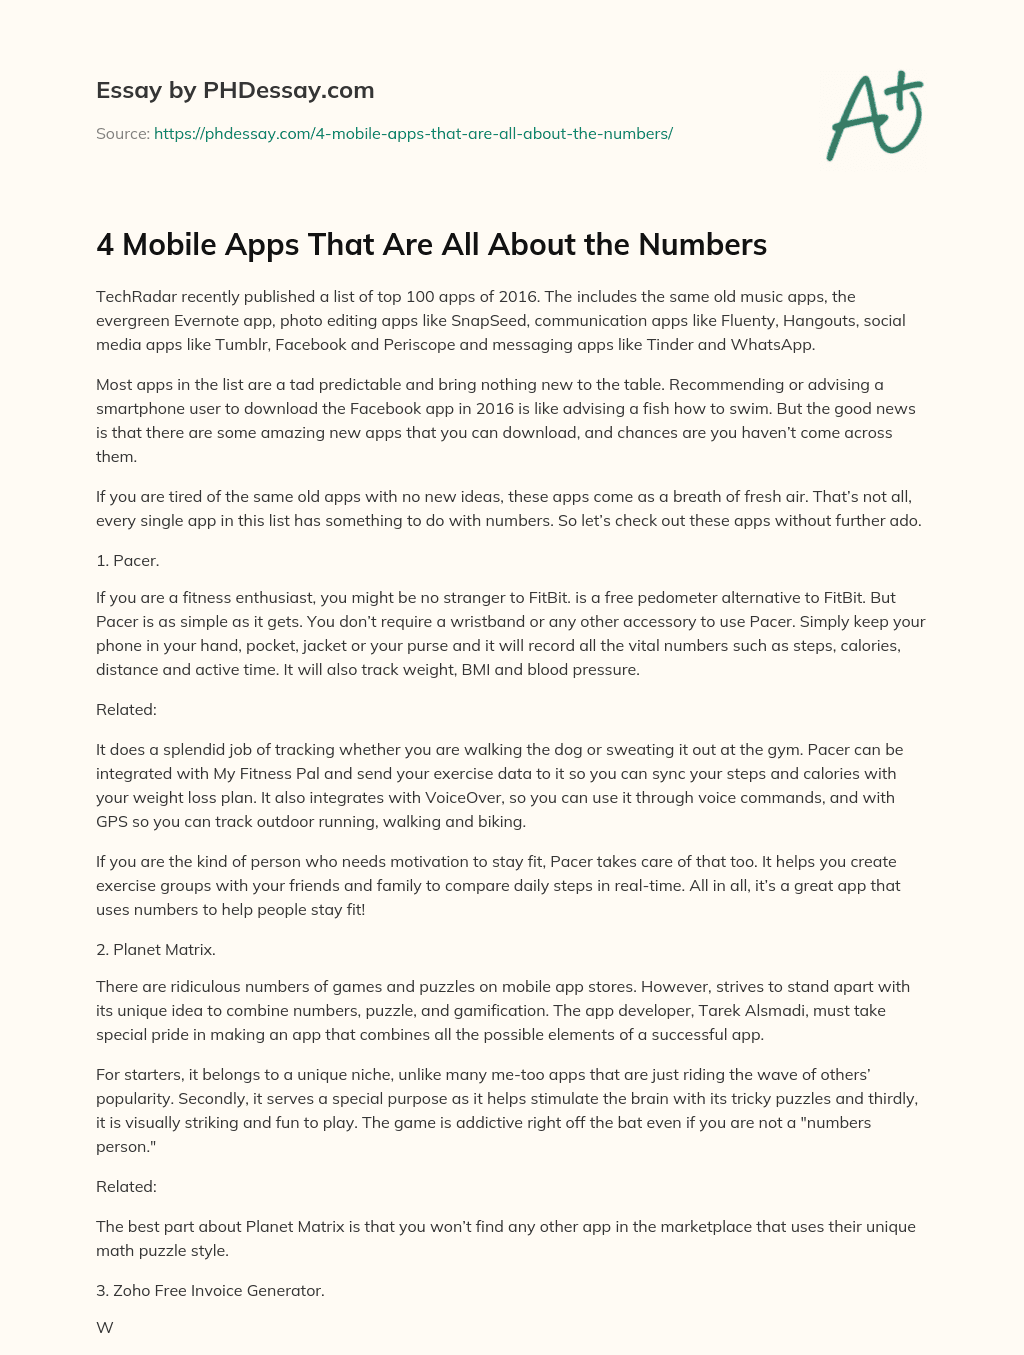 4 Mobile Apps That Are All About the Numbers essay